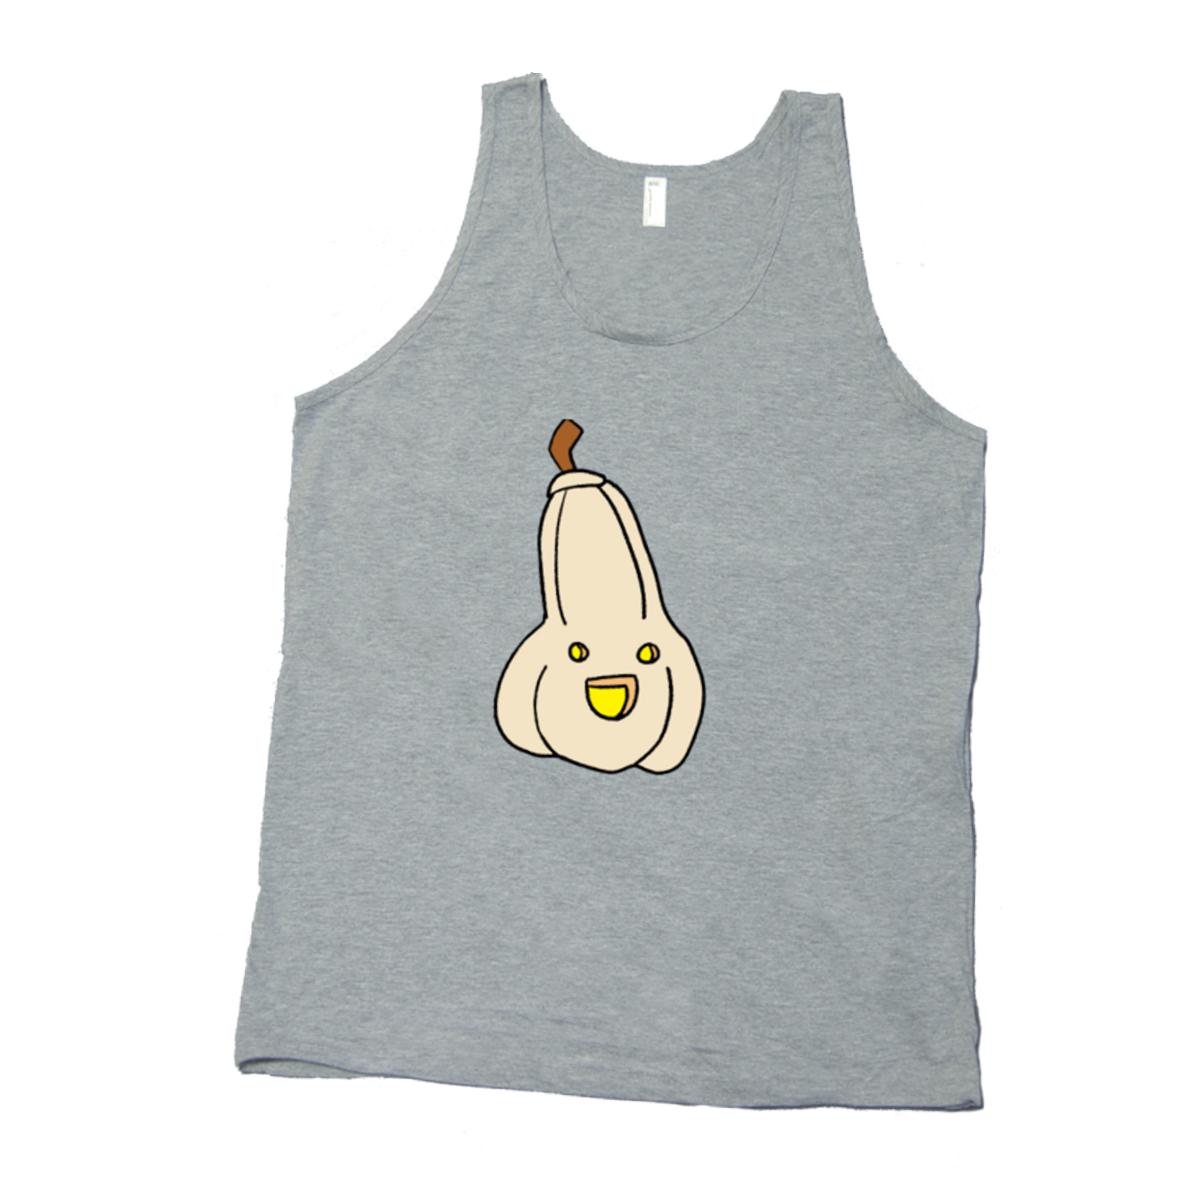 The New Guy Unisex Tank Top Extra Small heather-grey